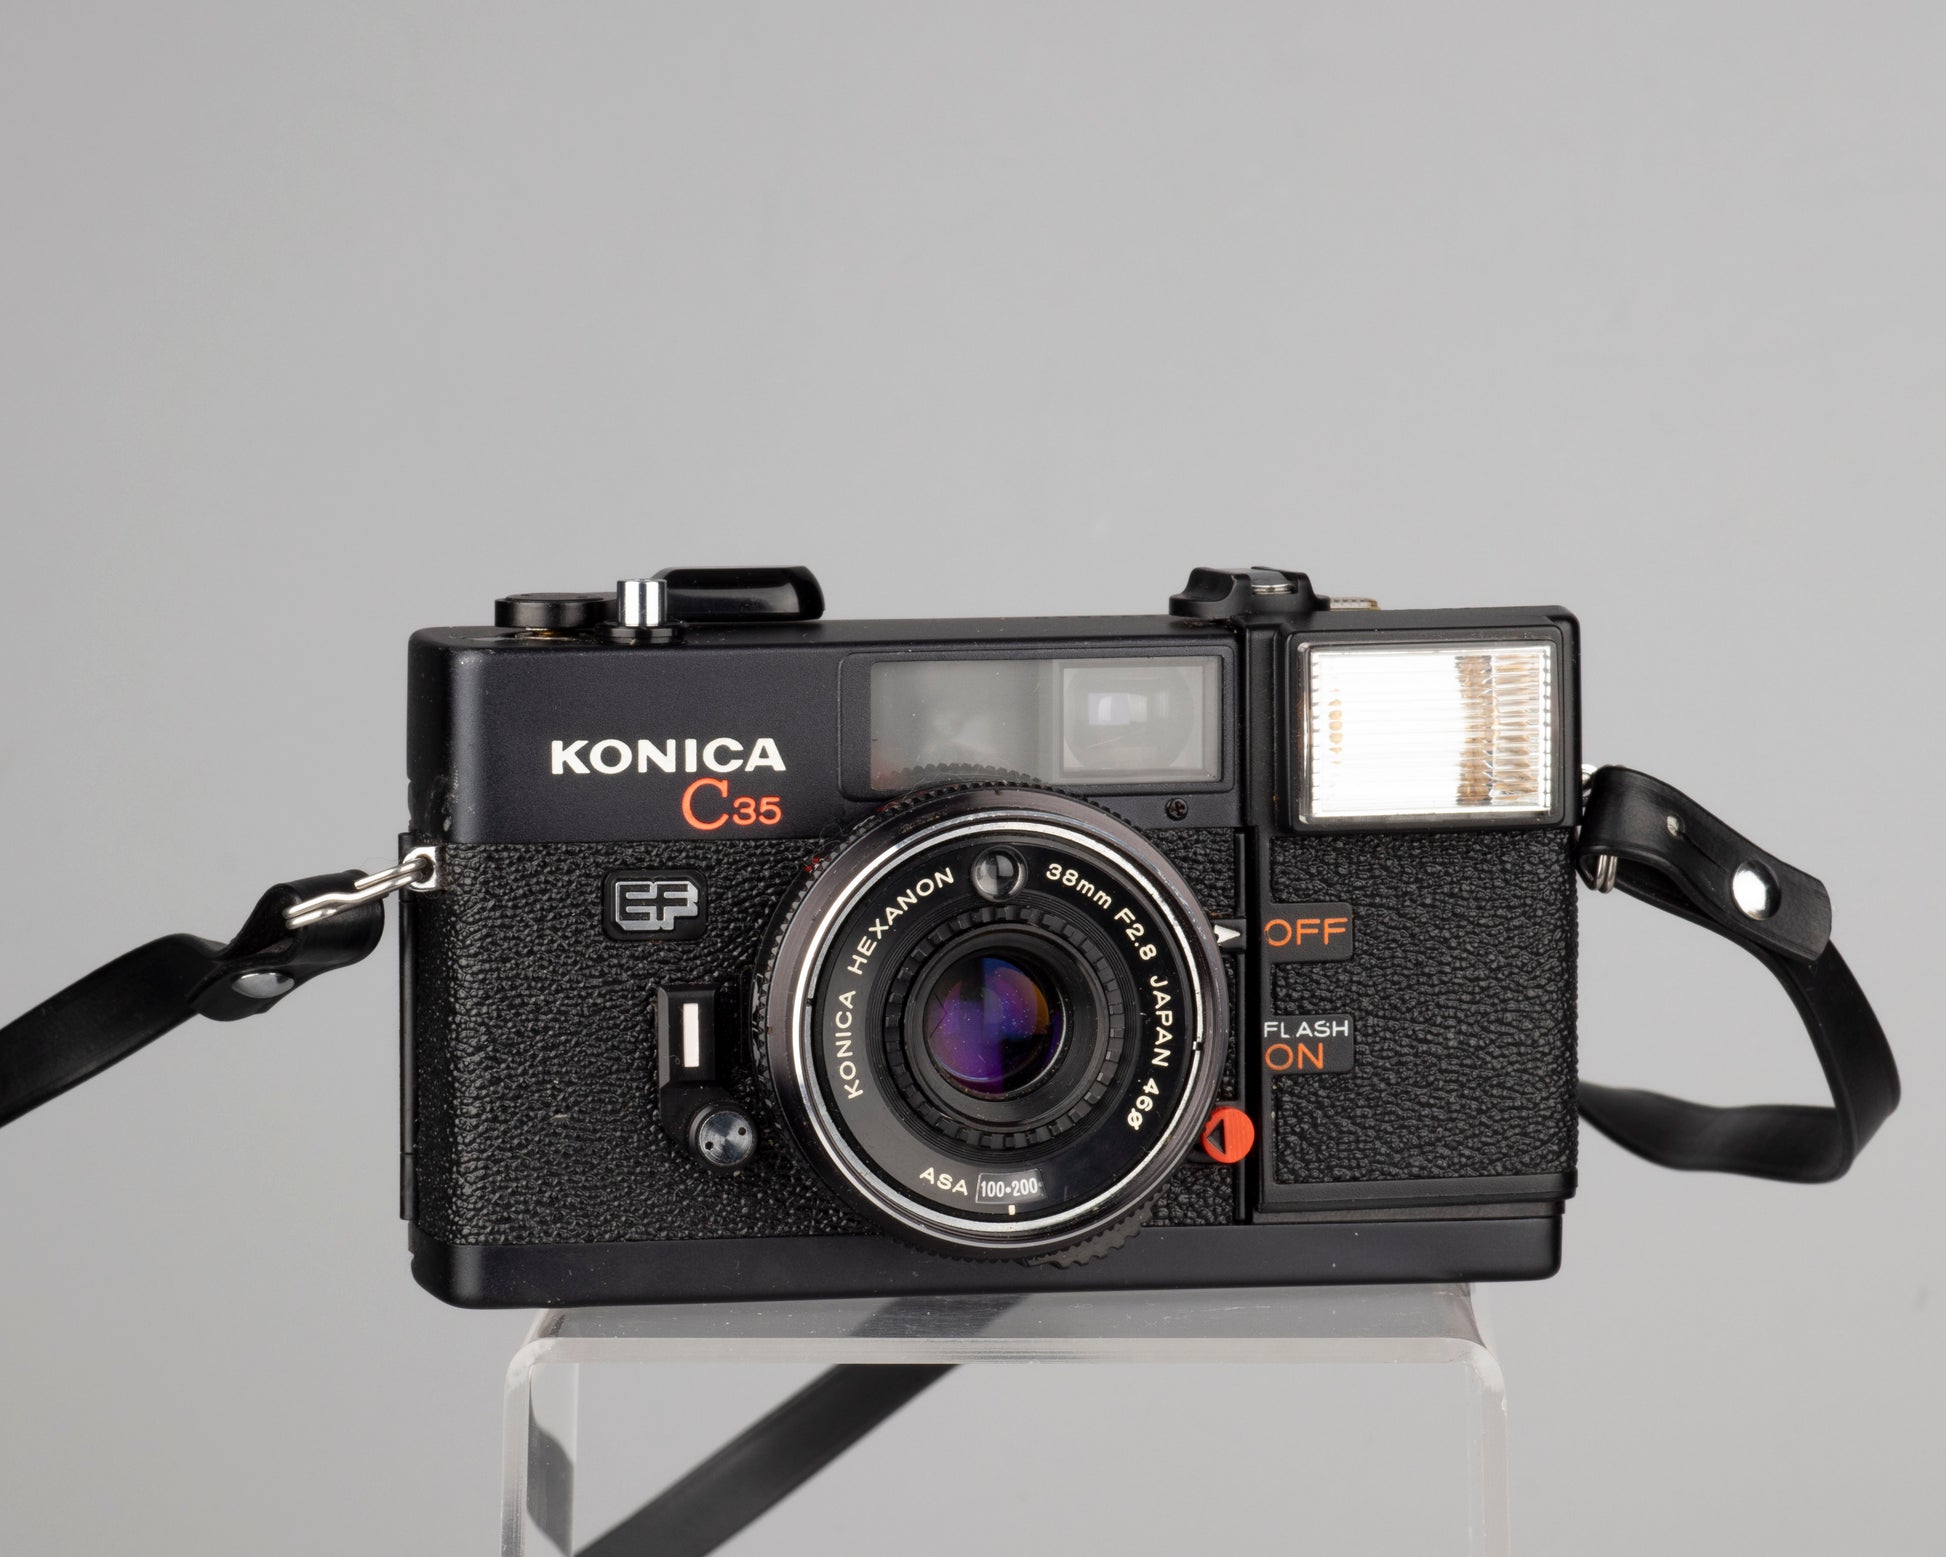 The Konica C35 EF is a classic 35mm viewfinder camera featuring an excellent 38mm f2.8 Hexanon lens